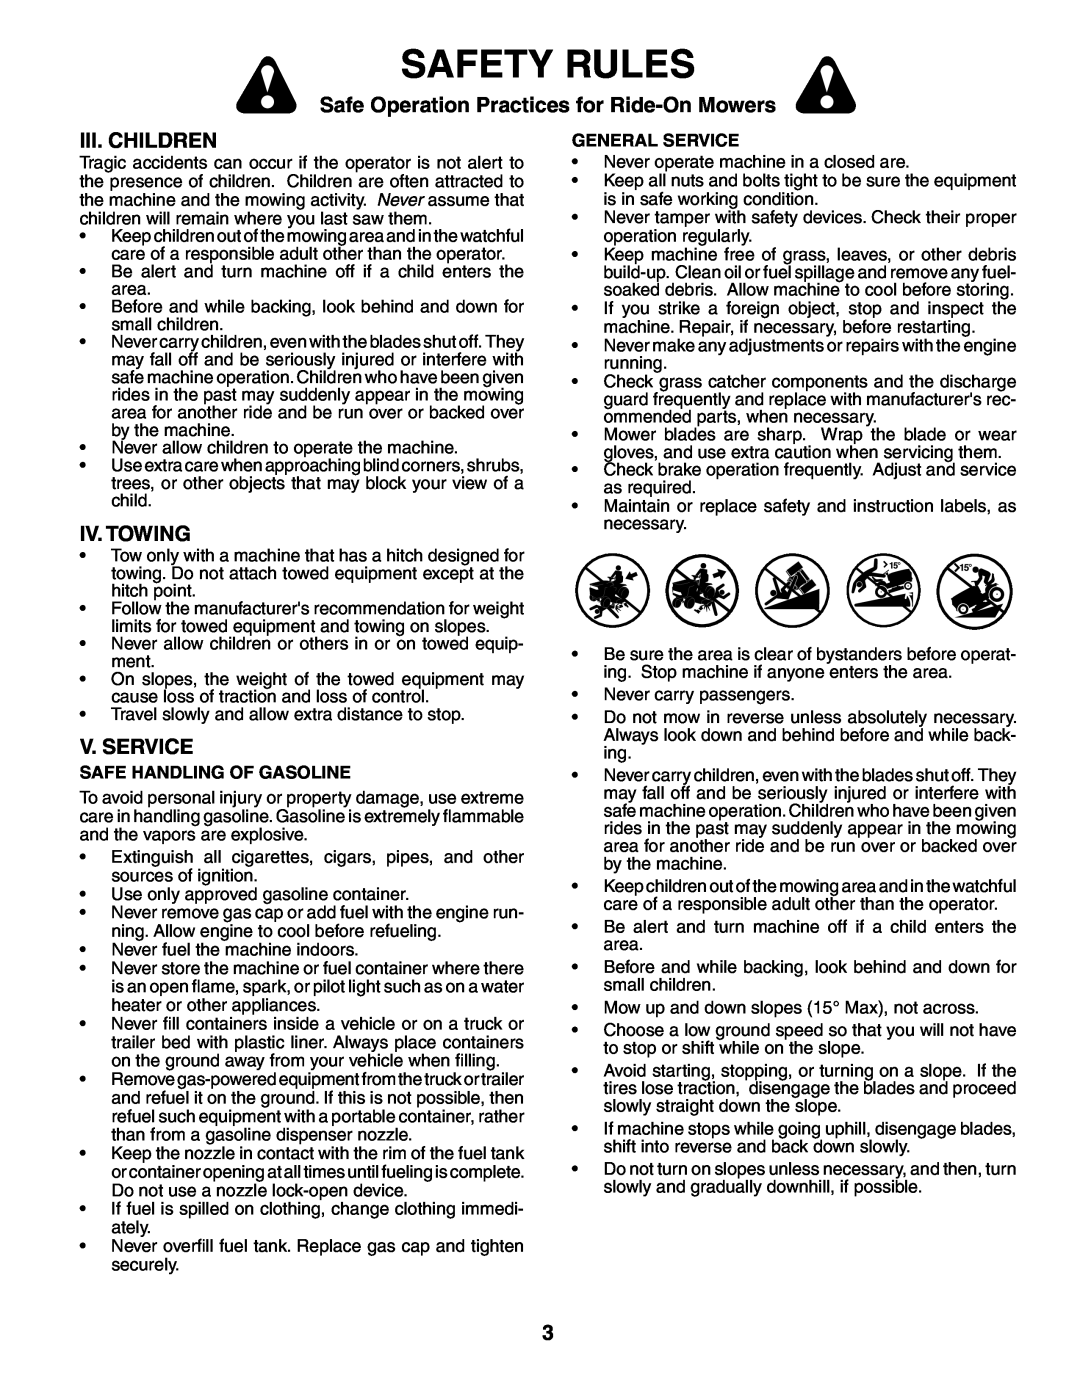 Weed Eater 96016001400 Iii. Children, Iv. Towing, V. Service, Safety Rules, Safe Operation Practices for Ride-On Mowers 